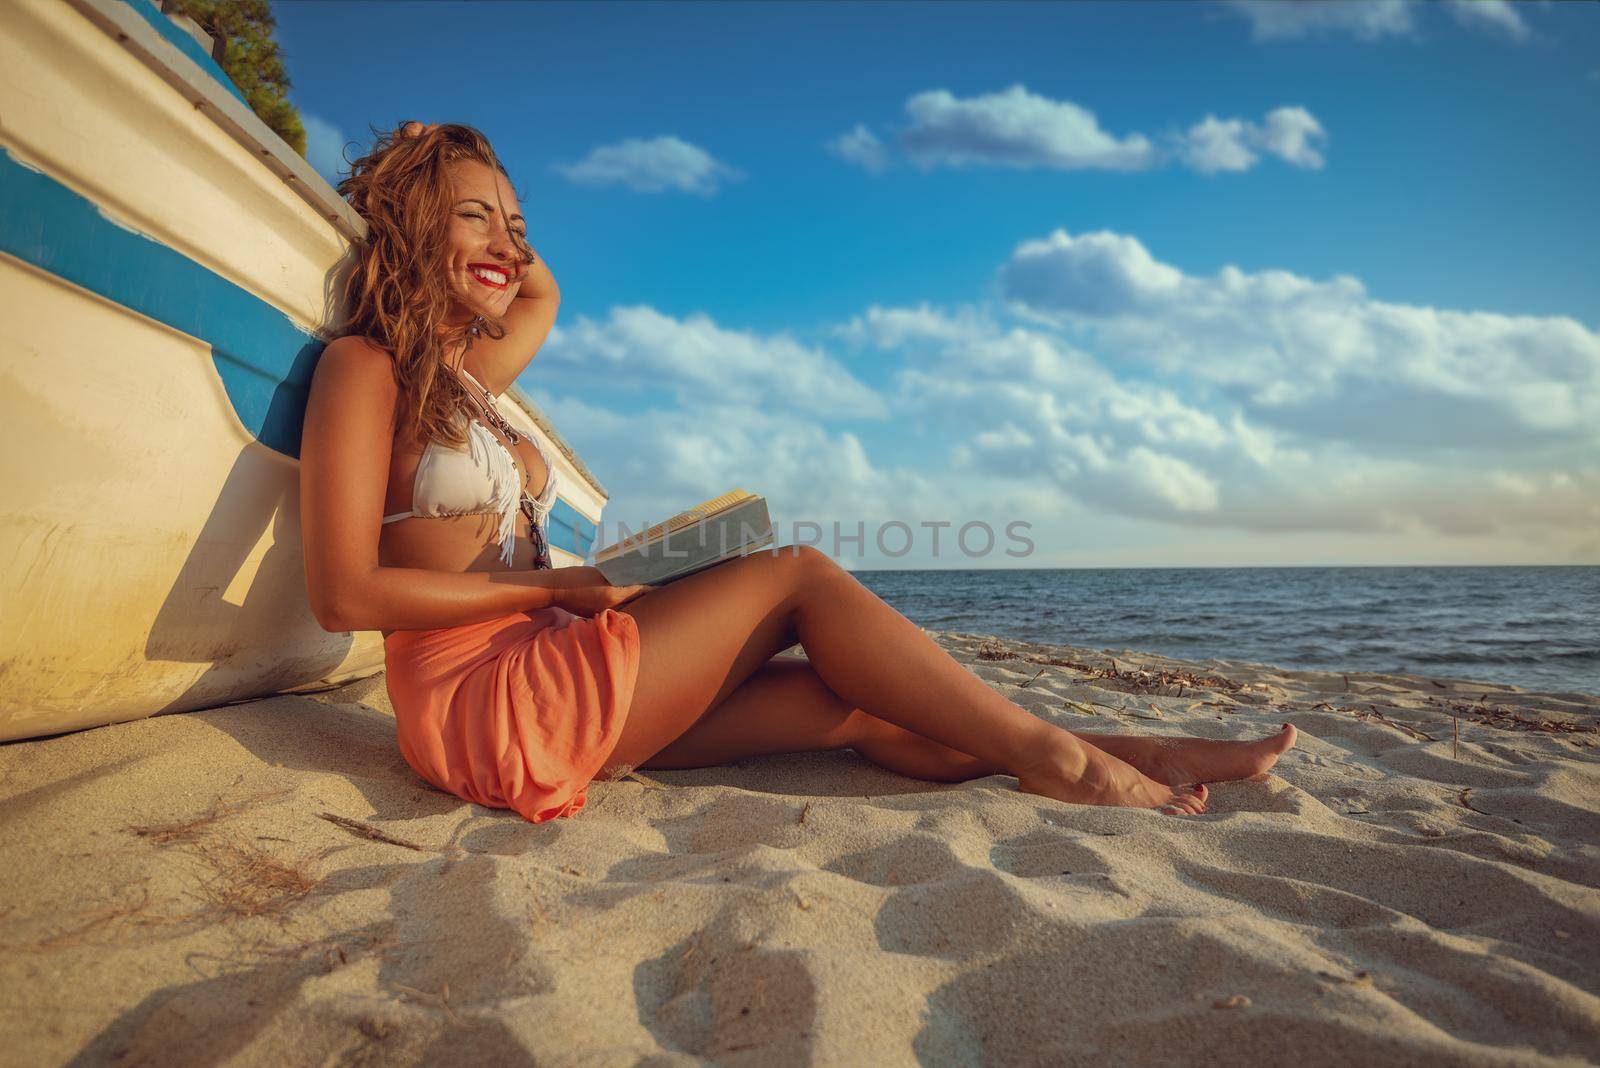 Young woman reading a book on the sandy beach.  She is sitting next to boat and enjoying with closed eyes and smile on her thinking face.